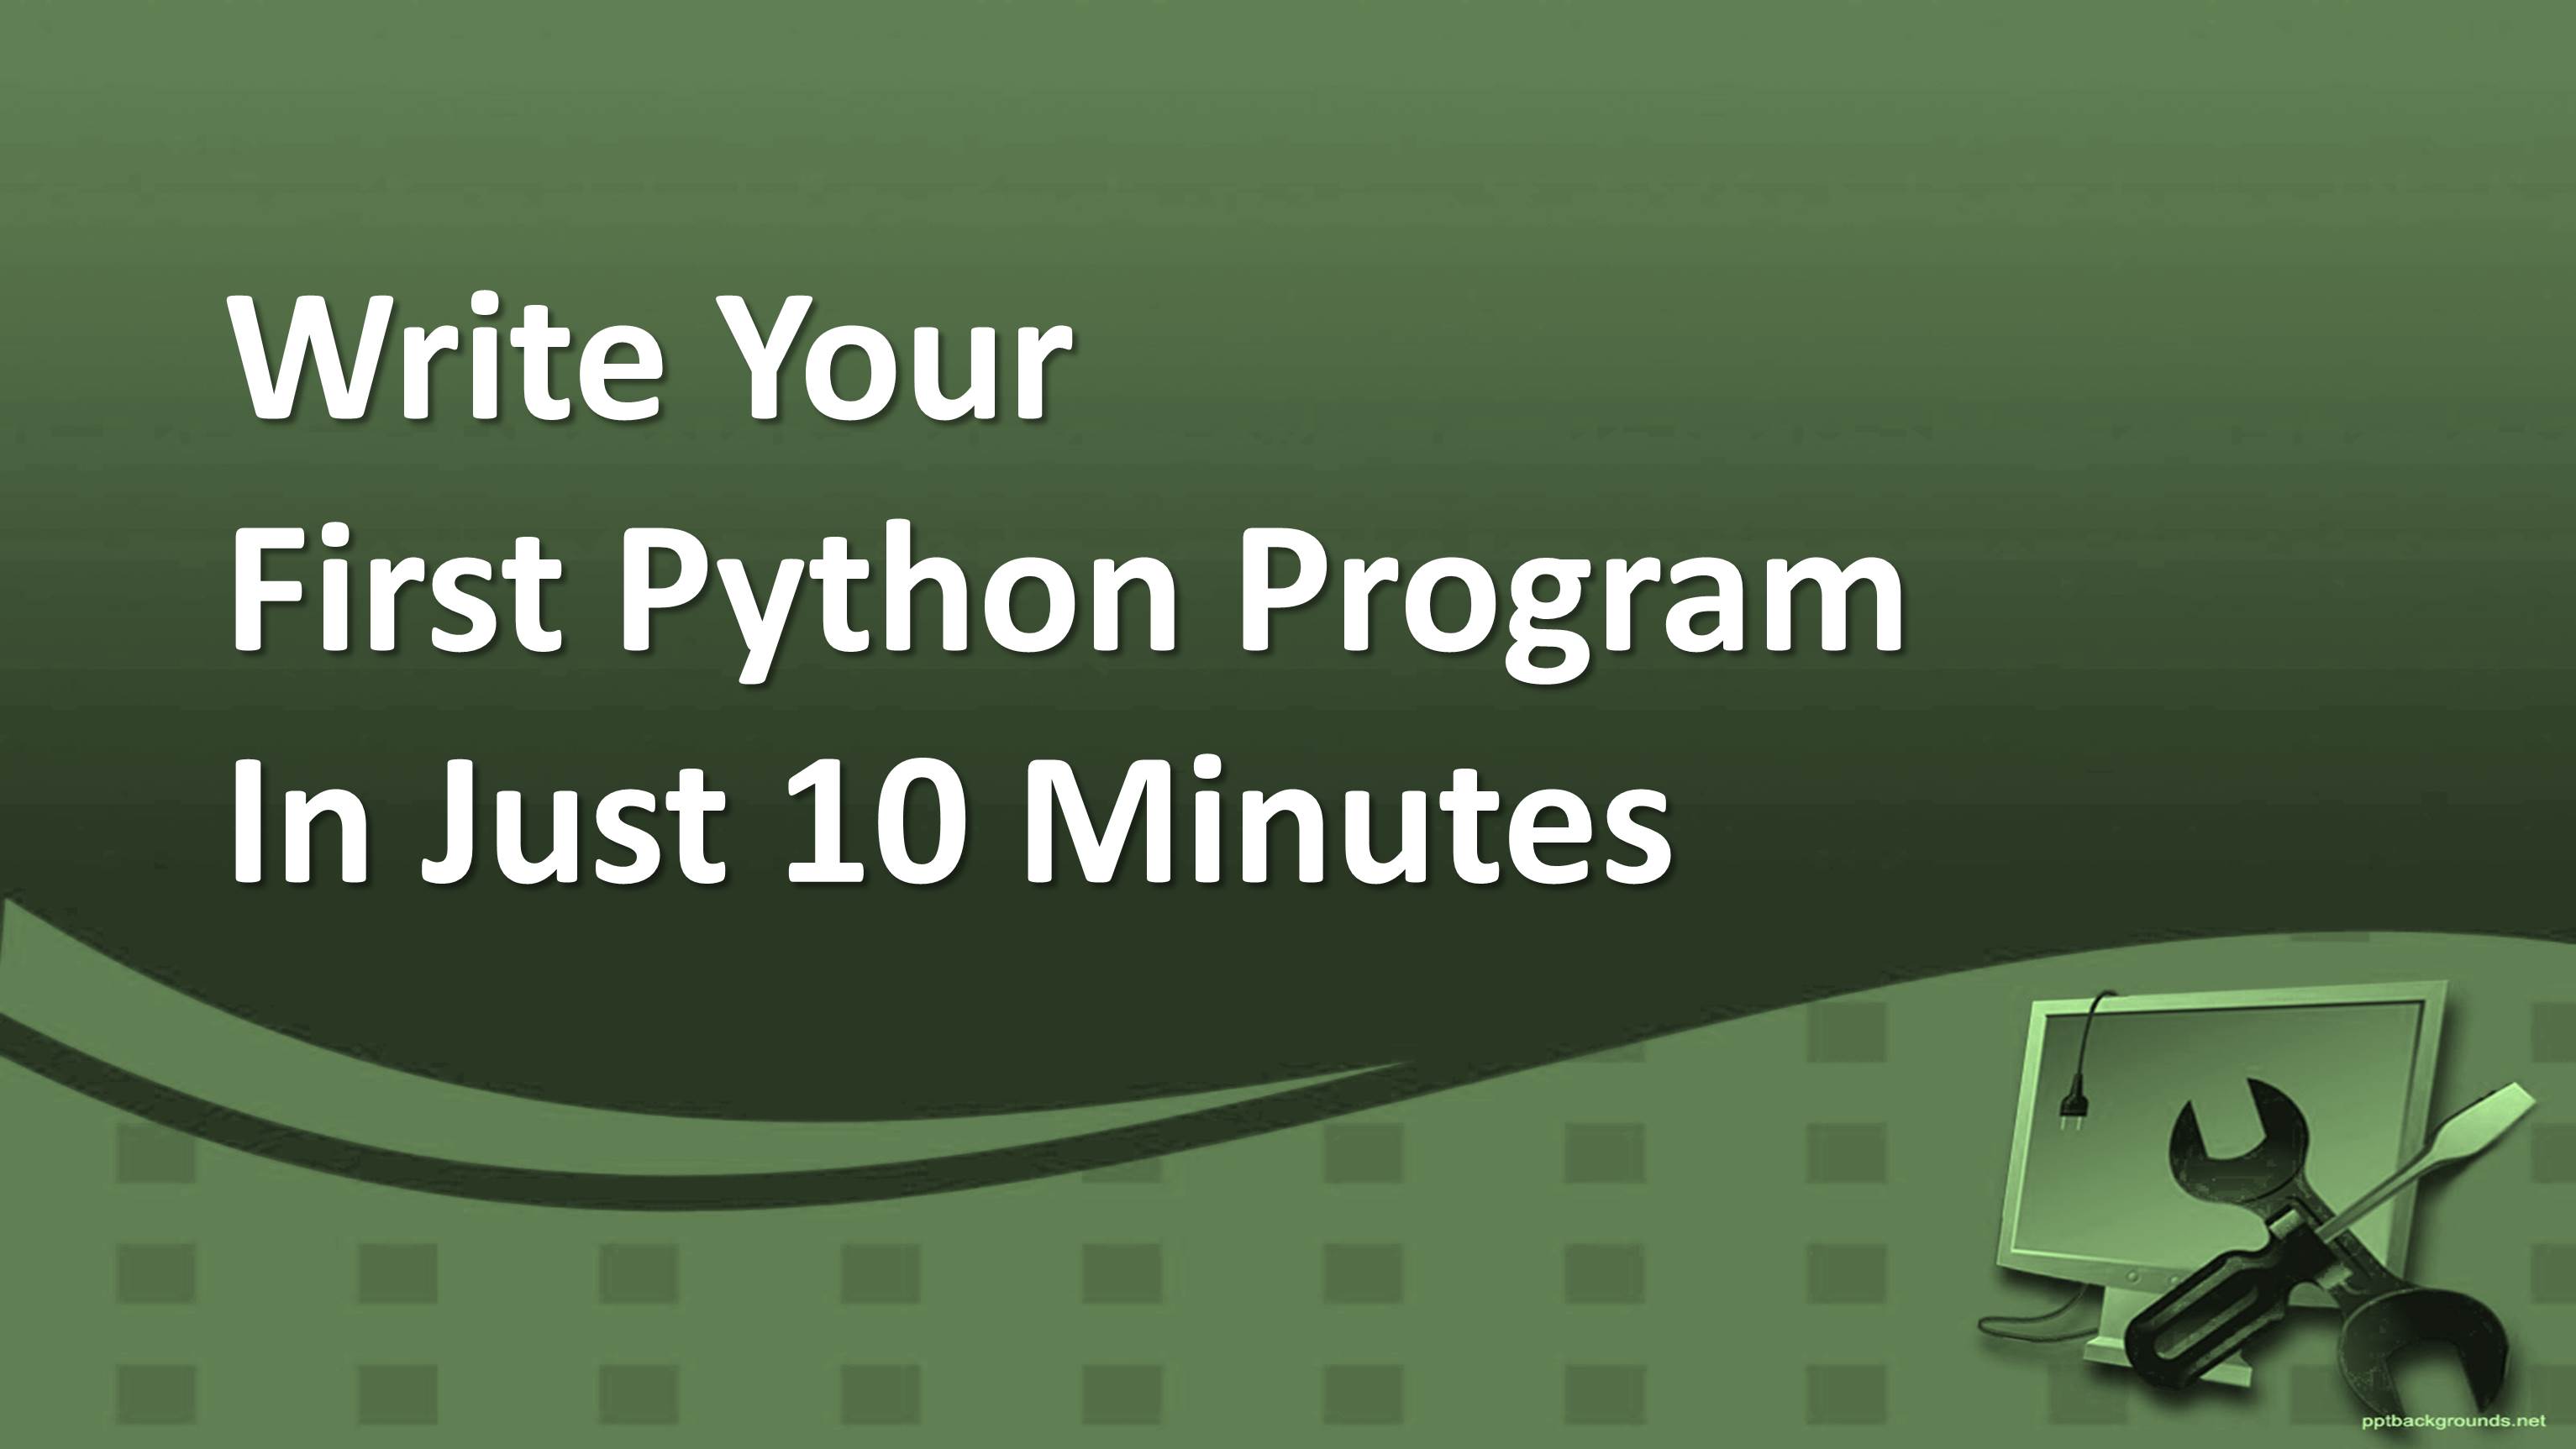 How To Write Your First Python Program In Just 10 Minutes